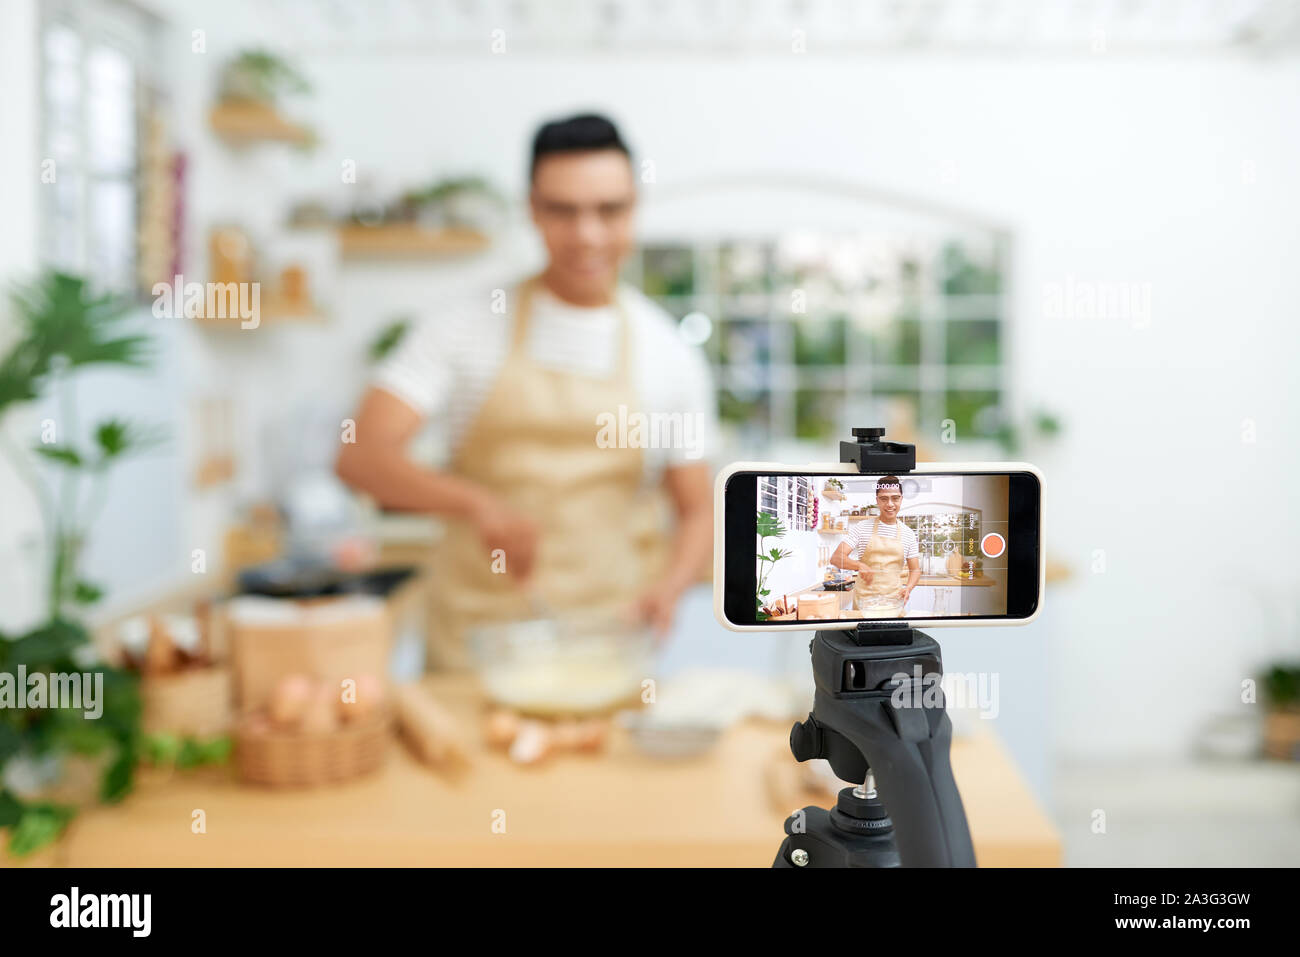 Baker online courses, food preparing and culinary training class concept Stock Photo